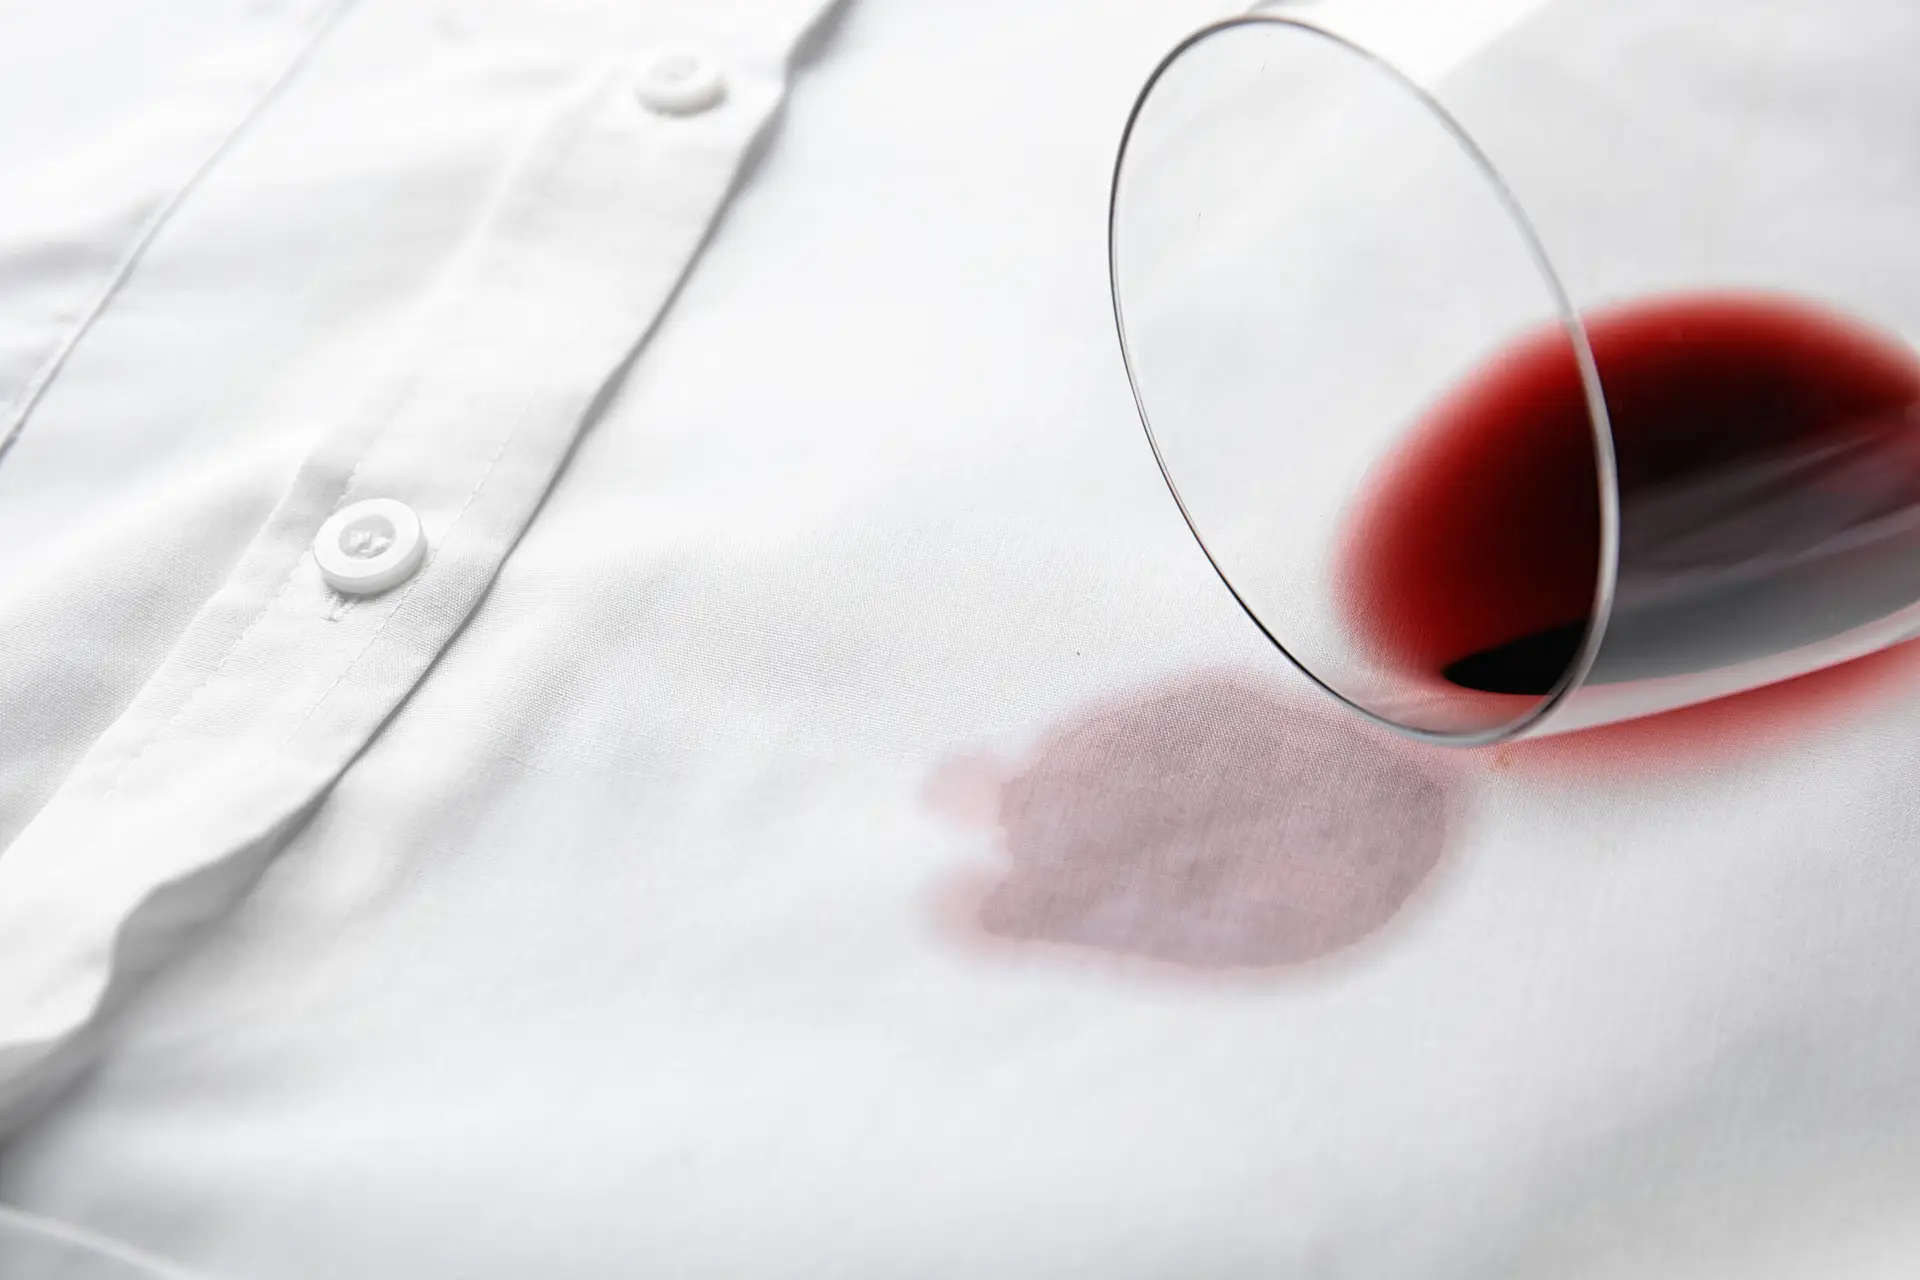 a glass of red wine on a white shirt